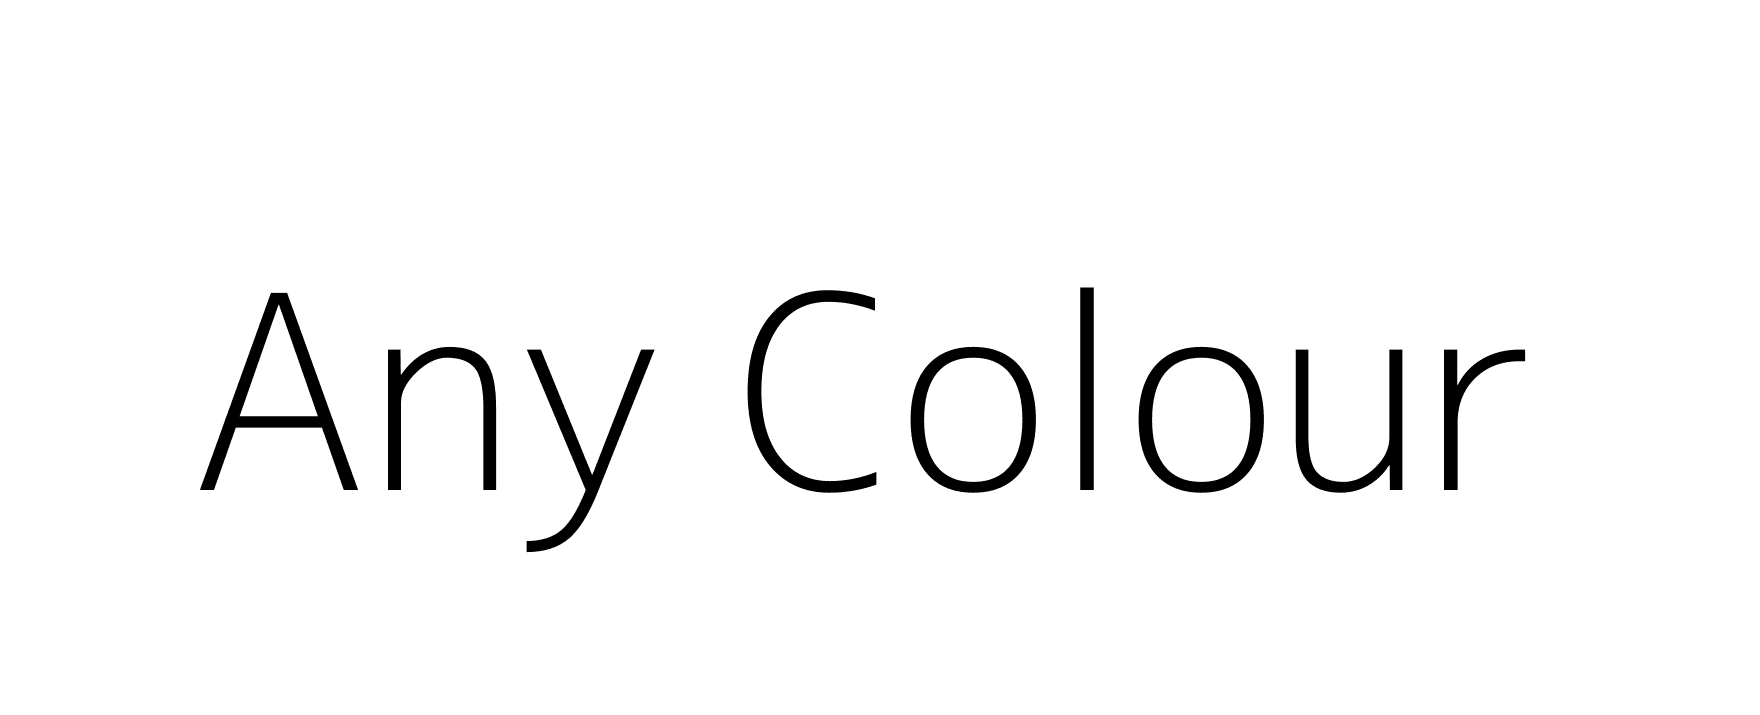 Any Colour